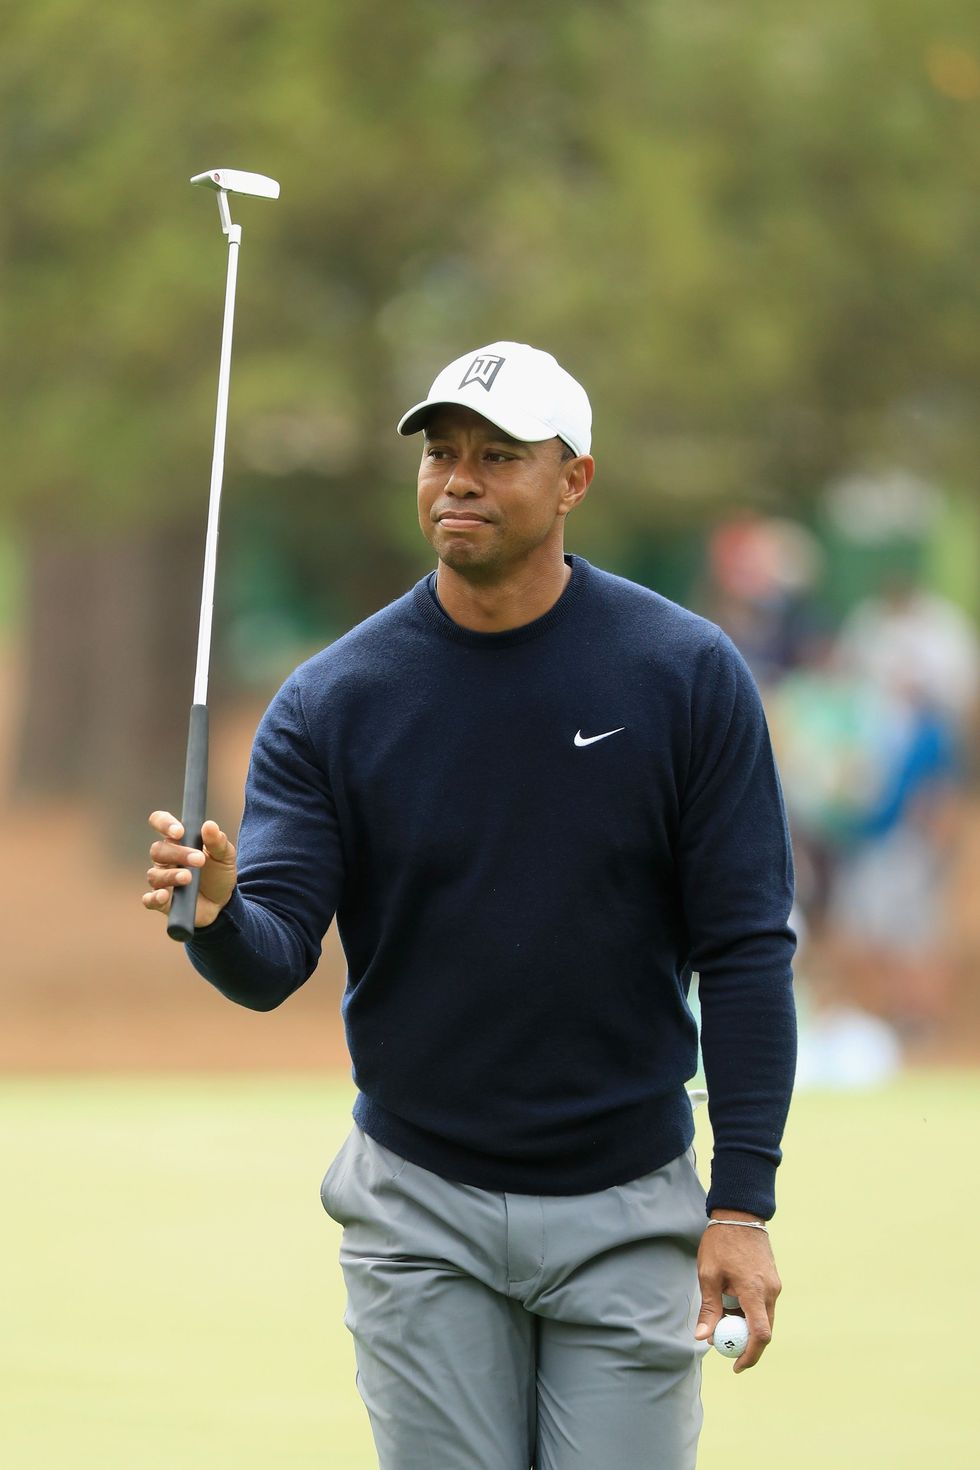 Fred Faour: This is about Tiger Woods, so you will probably click on it